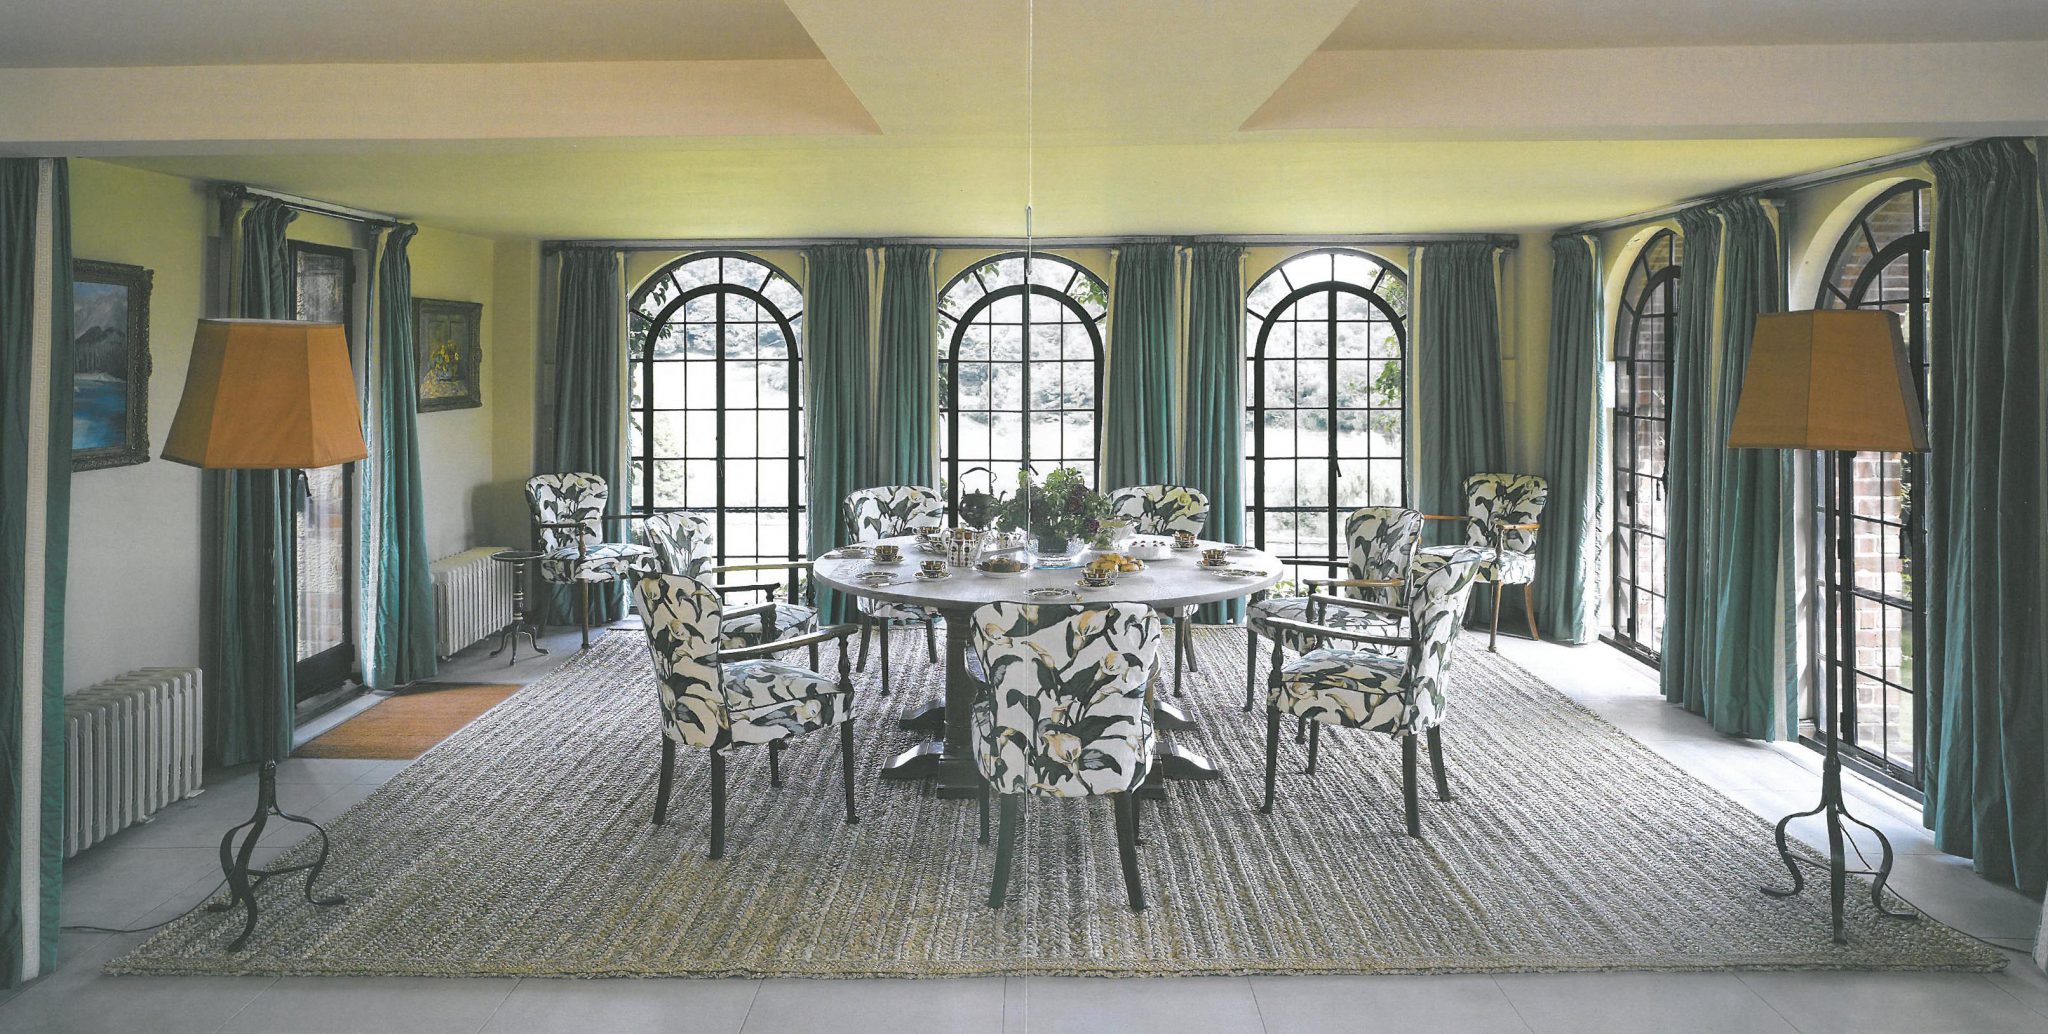 I adored the basement-level Dining Room, which has windows on three sides. The sea-grass carpet is woven specially for this space and the room is suffused with the fresh aroma of that grass. This rug is regularly replaced, so as to maintain the clean smell that Winston enjoyed. The vivid glazed chintz covering the chairs is the same pattern--"Arum Lily"--that has always decorated the room.